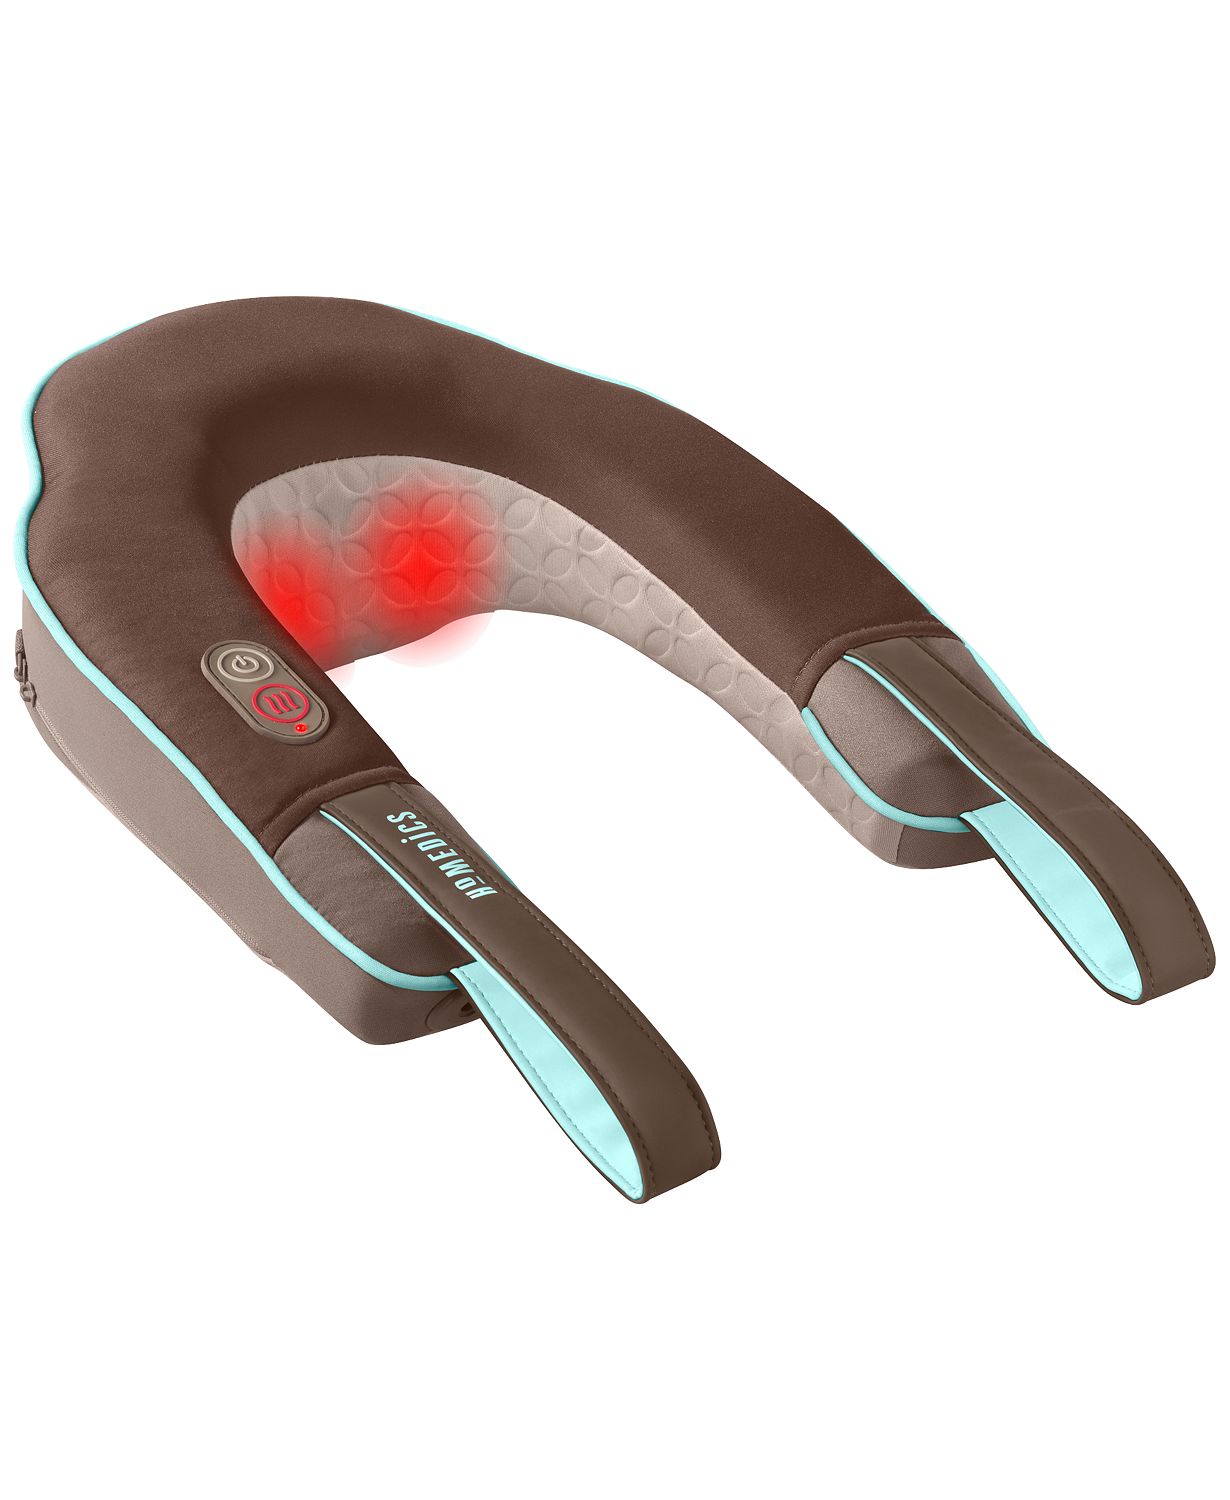 Great Buy Homedics Neck And Shoulder Massager With Heat Now 9 99